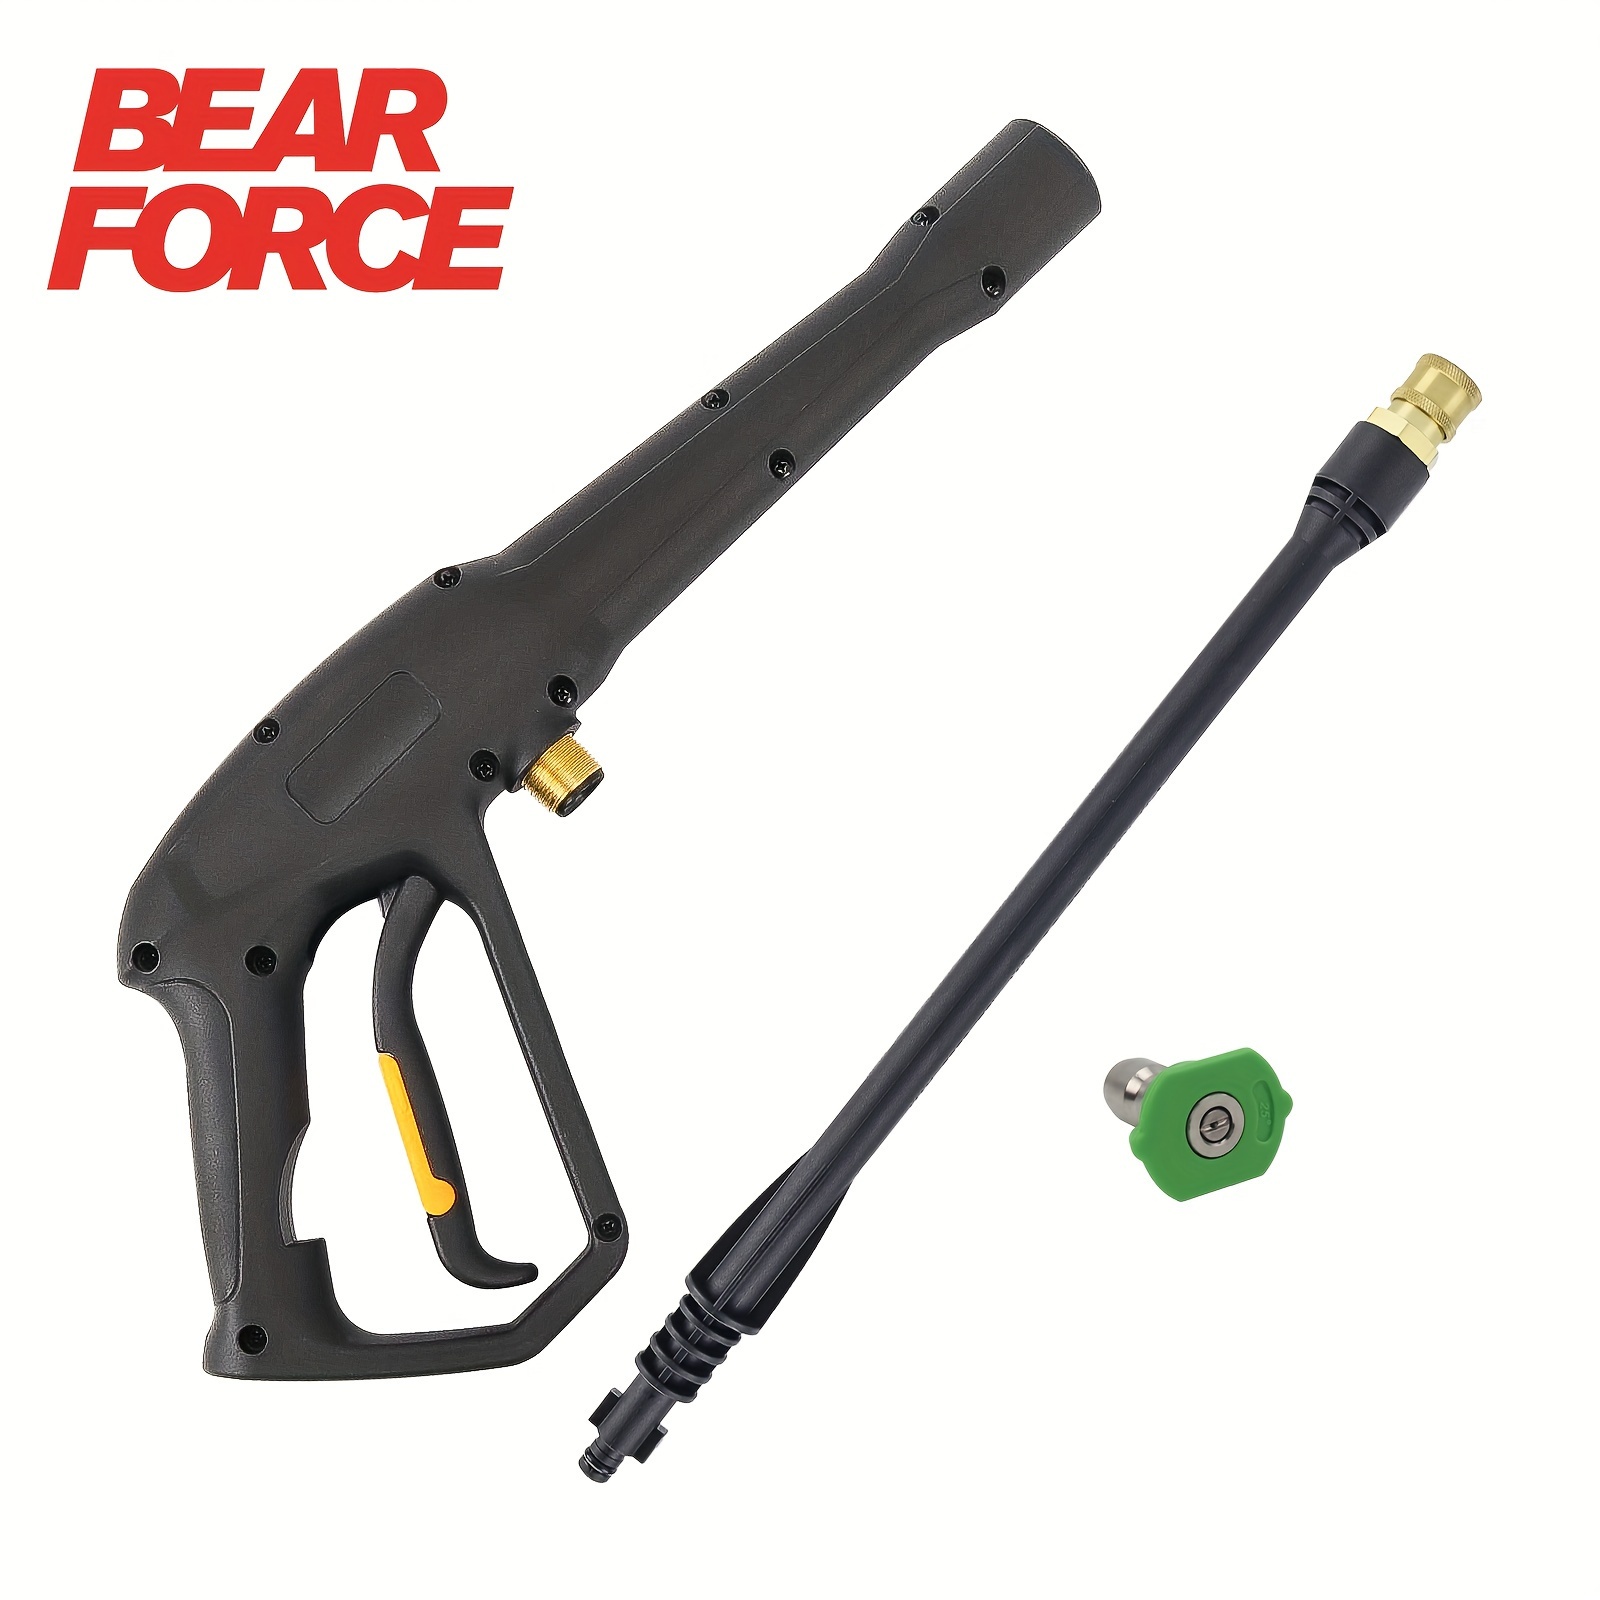 

Bear Force High Pressure Water Spray Wand Jet Nozzle Tips, Power Washer Water Compatible With Some Of Greenworks Karcher Homelite Electric Pressure Washer Max 1900 Psi